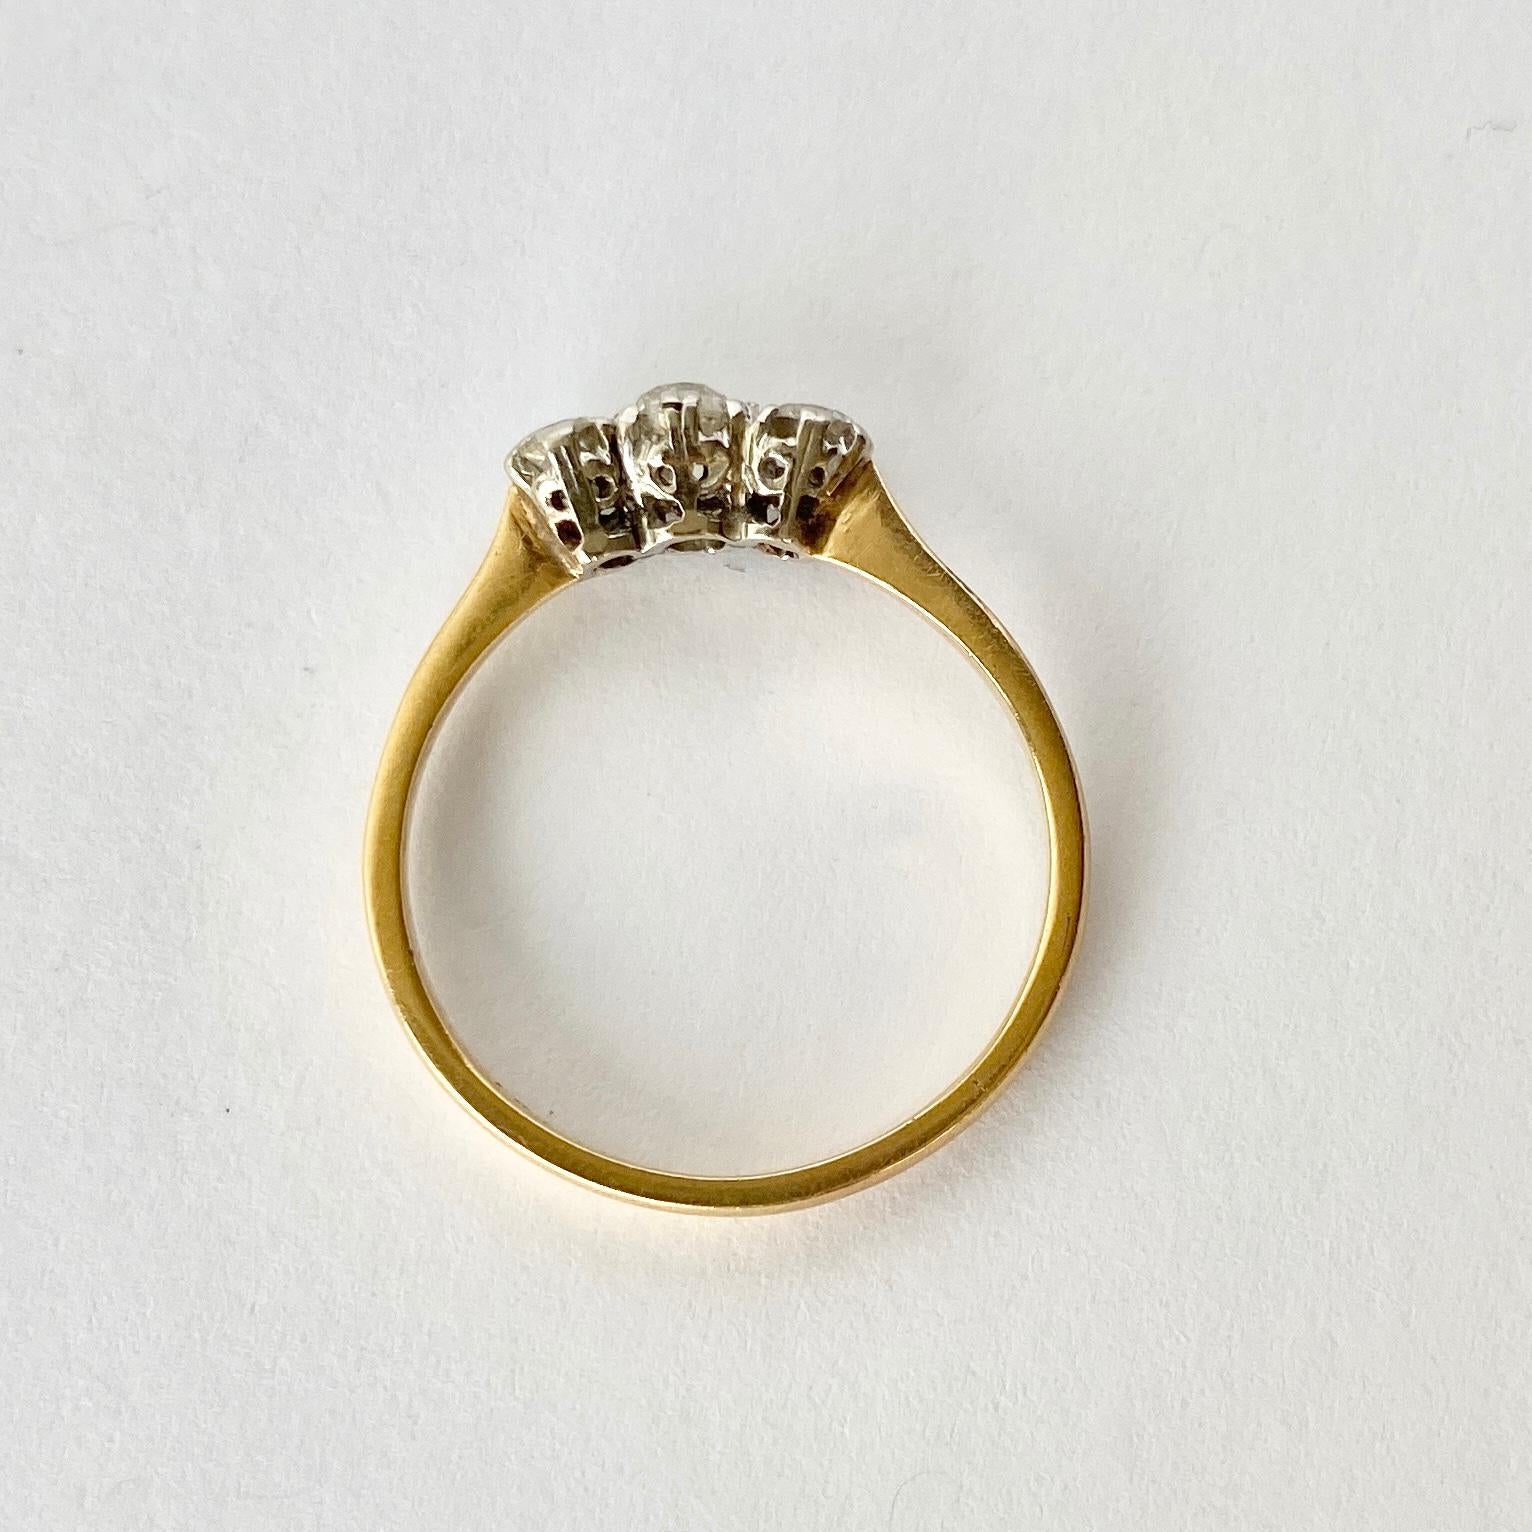 The diamonds in this ring total 55pts and old European cut and are bright and sparkly. They are held in very subtle platinum claws upon an 18carat gold band. 

Ring Size: Q or 8 

Weight: 2.6g